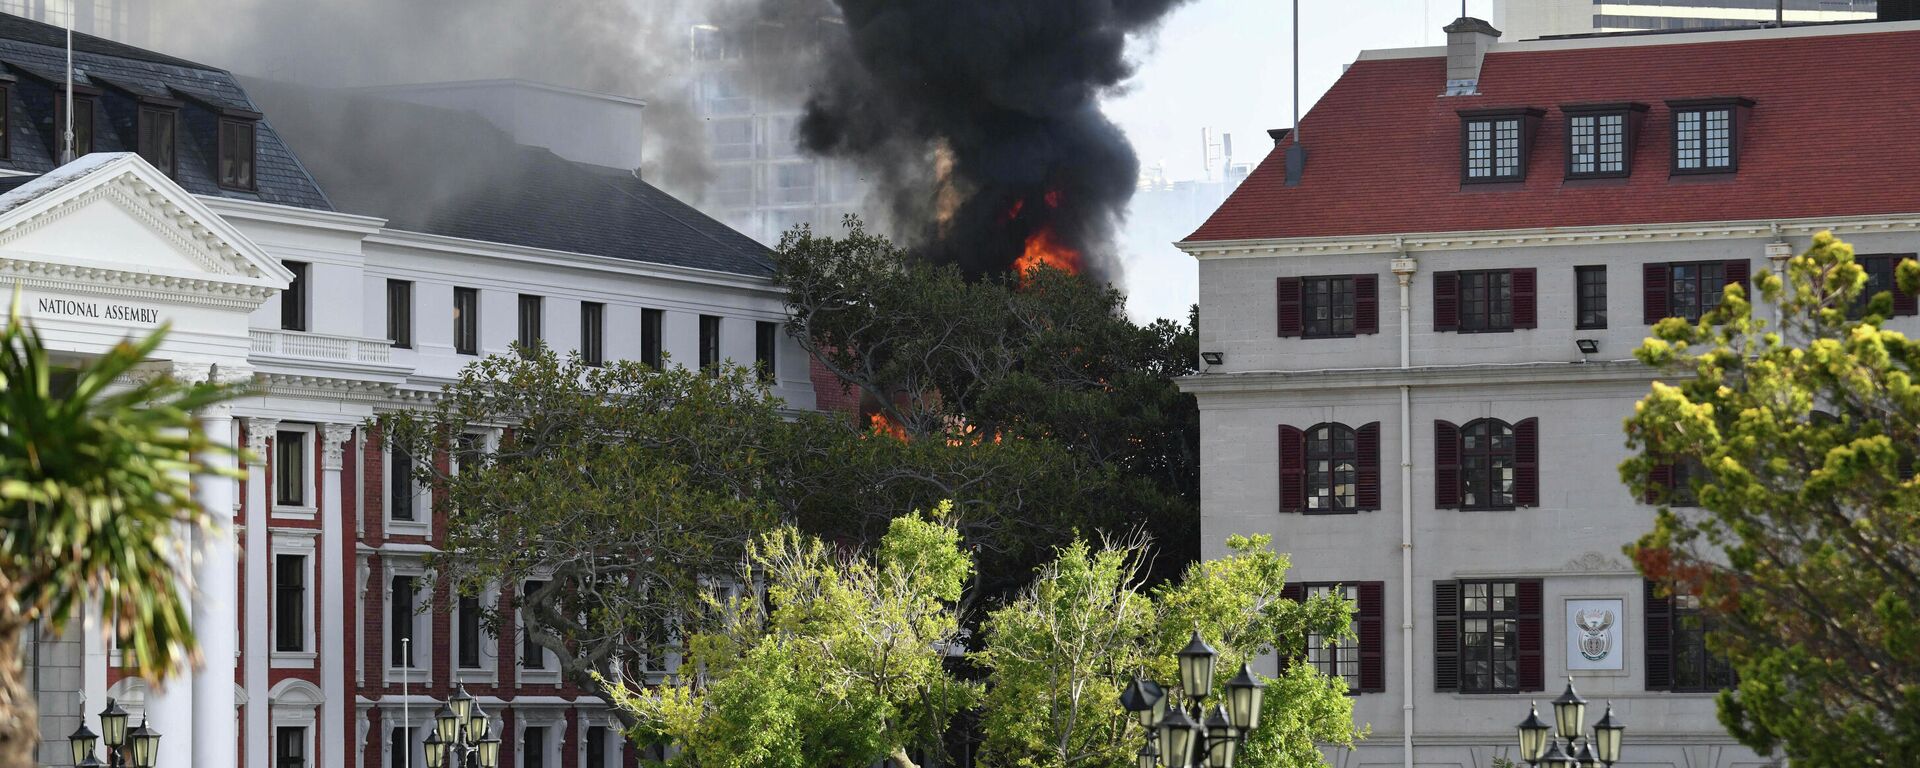 A fire burns at the Houses of Parliament, in Cape Town, South Africa, Sunday, Jan. 2, 2022. The country's minister of public works and infrastructure said Sunday's fire started on the third floor of a building that houses offices and spread to the National Assembly building, where South Africa's Parliament sits. - Sputnik International, 1920, 02.01.2022